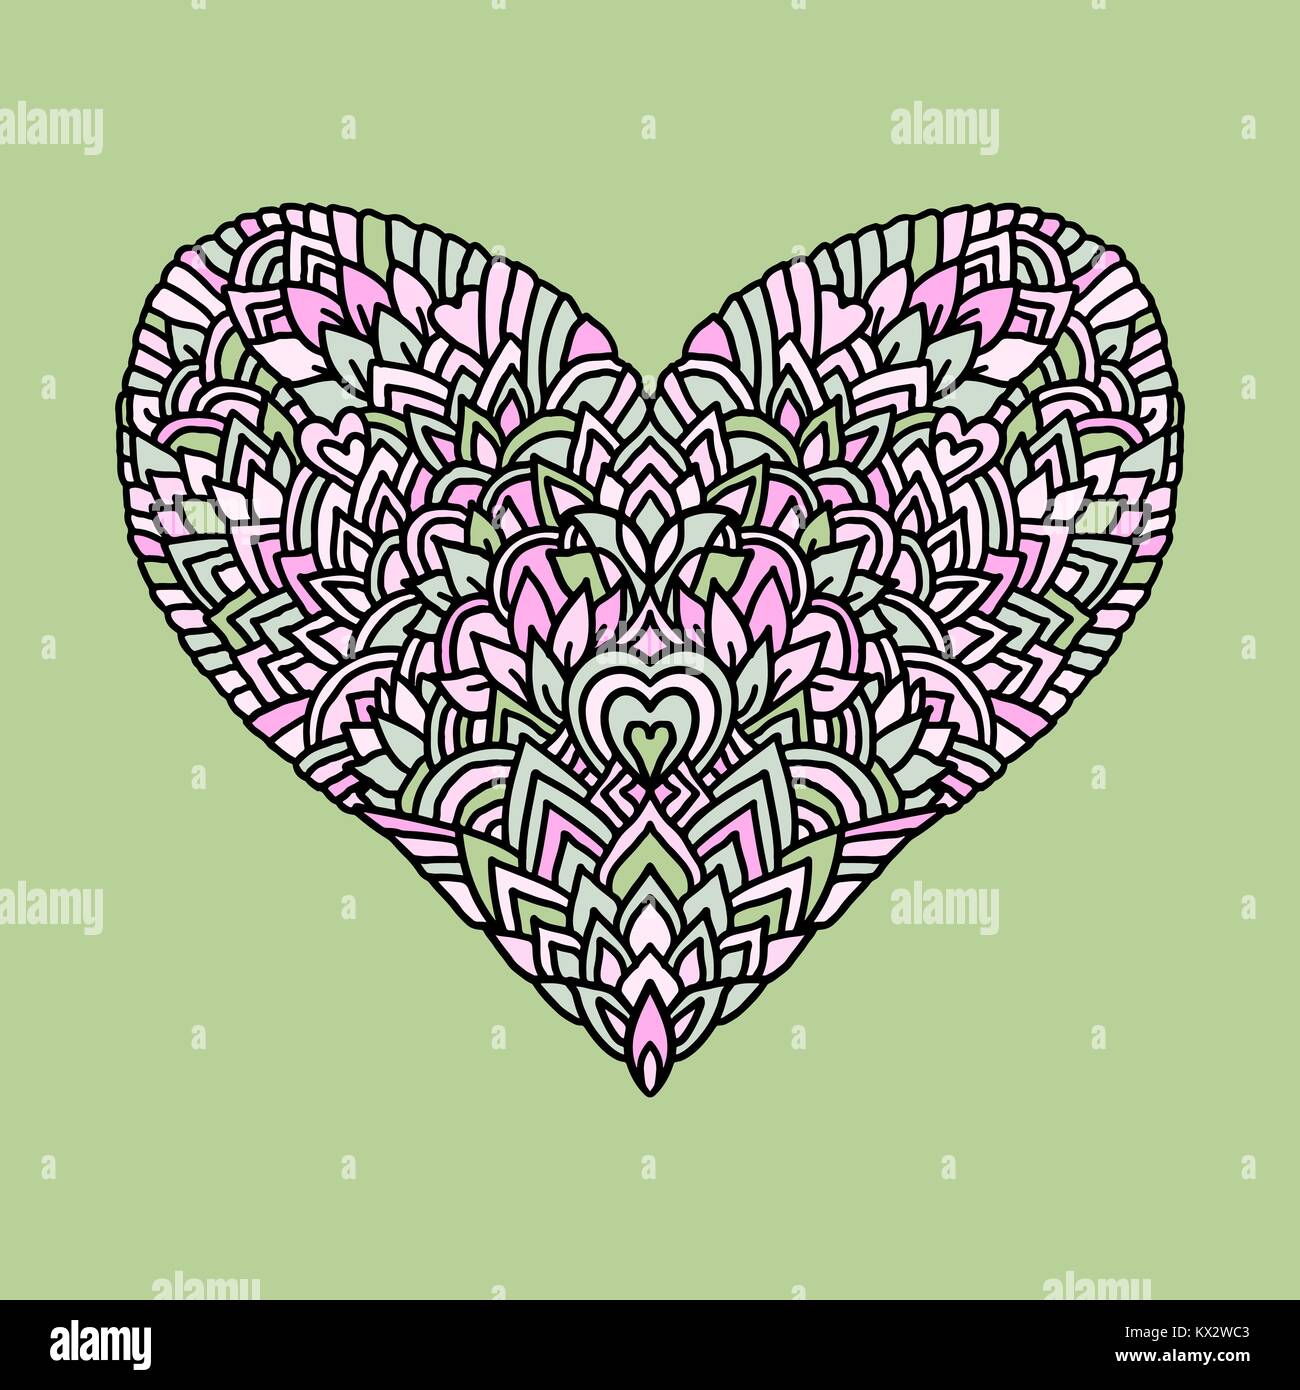 Handdrawn zentangle heart. Mandala style design for St. Valentine day cards. Coloring book pattern. Vector doodle illustration. Stock Vector